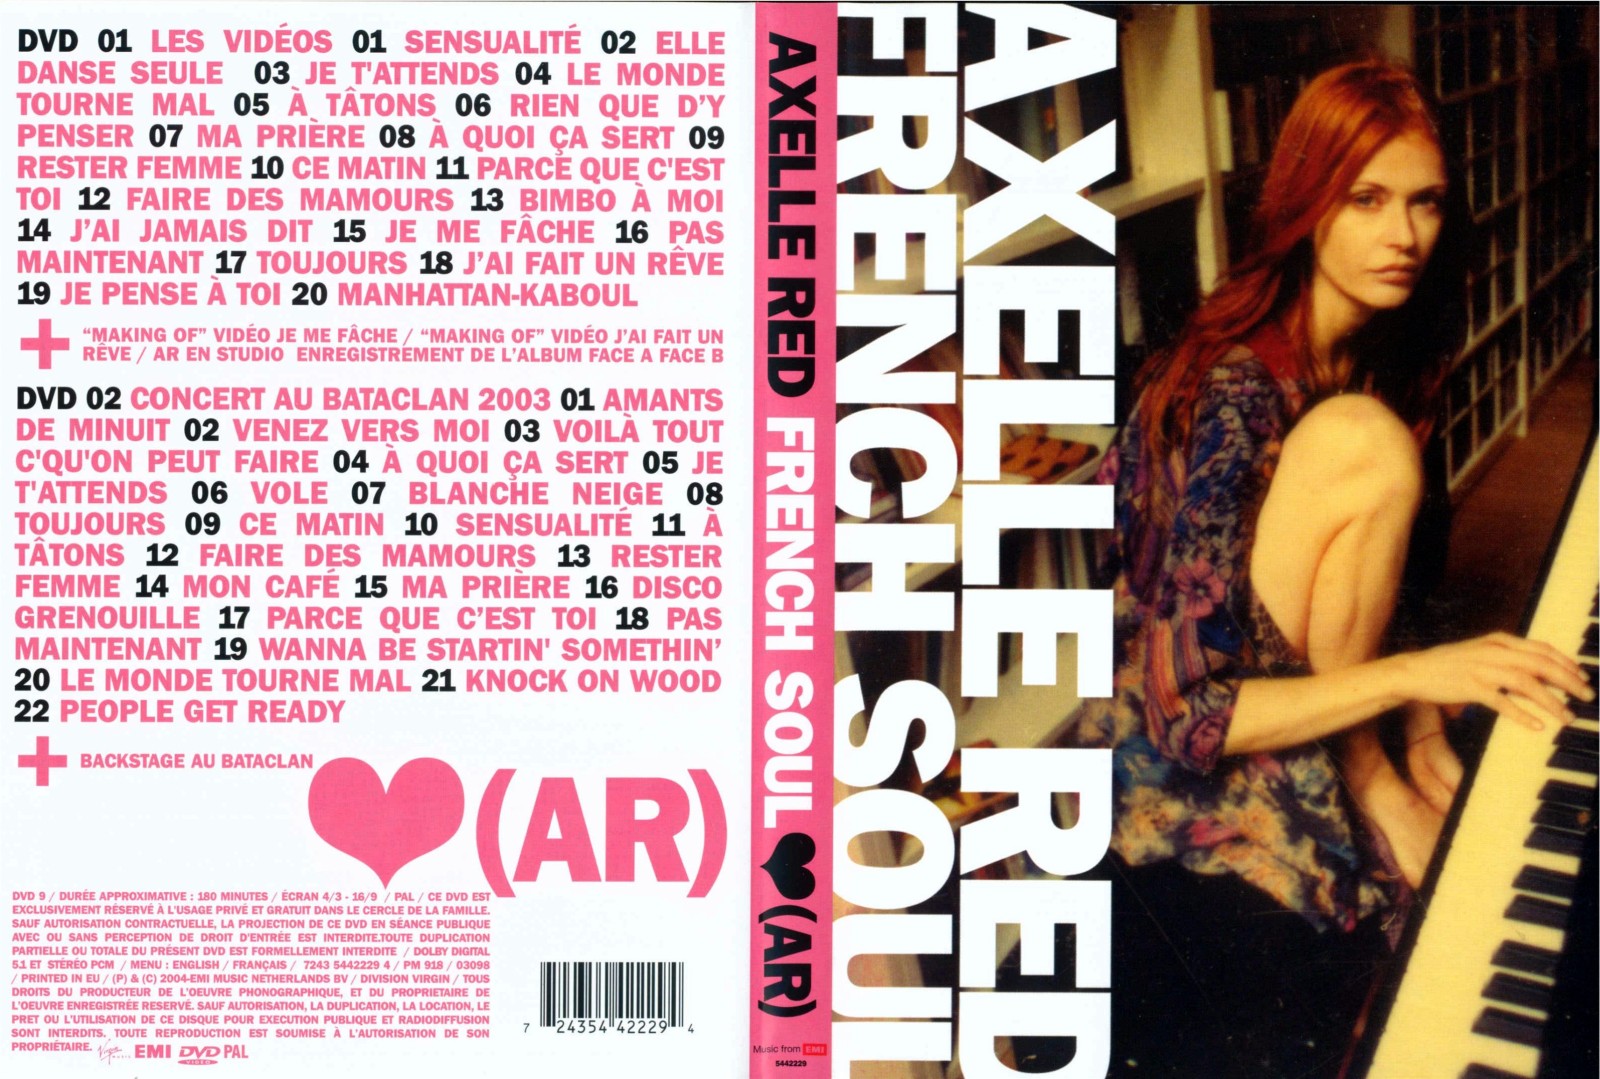 Jaquette DVD Axelle Red French soul